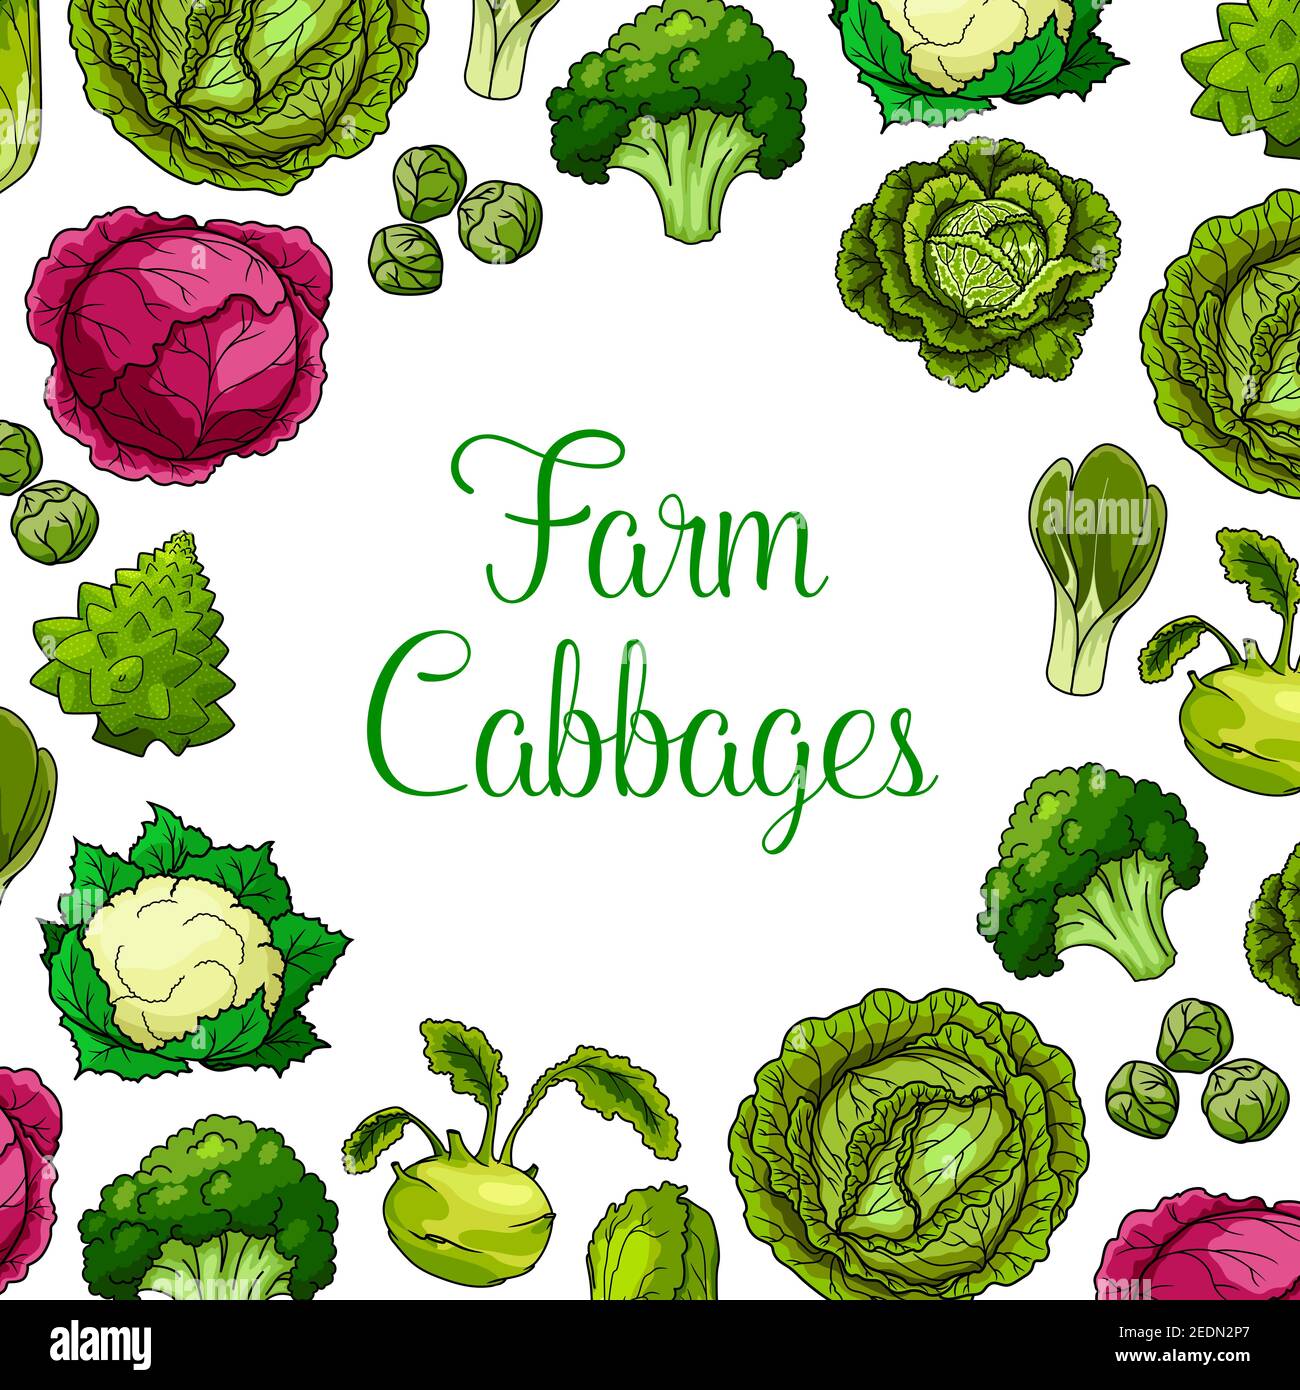 Cabbages vector vegetables with white and red cabbage, romanesco, kohlrabi and brussels sprouts, cauliflower, chinese cabbage and pak choi and scotch Stock Vector